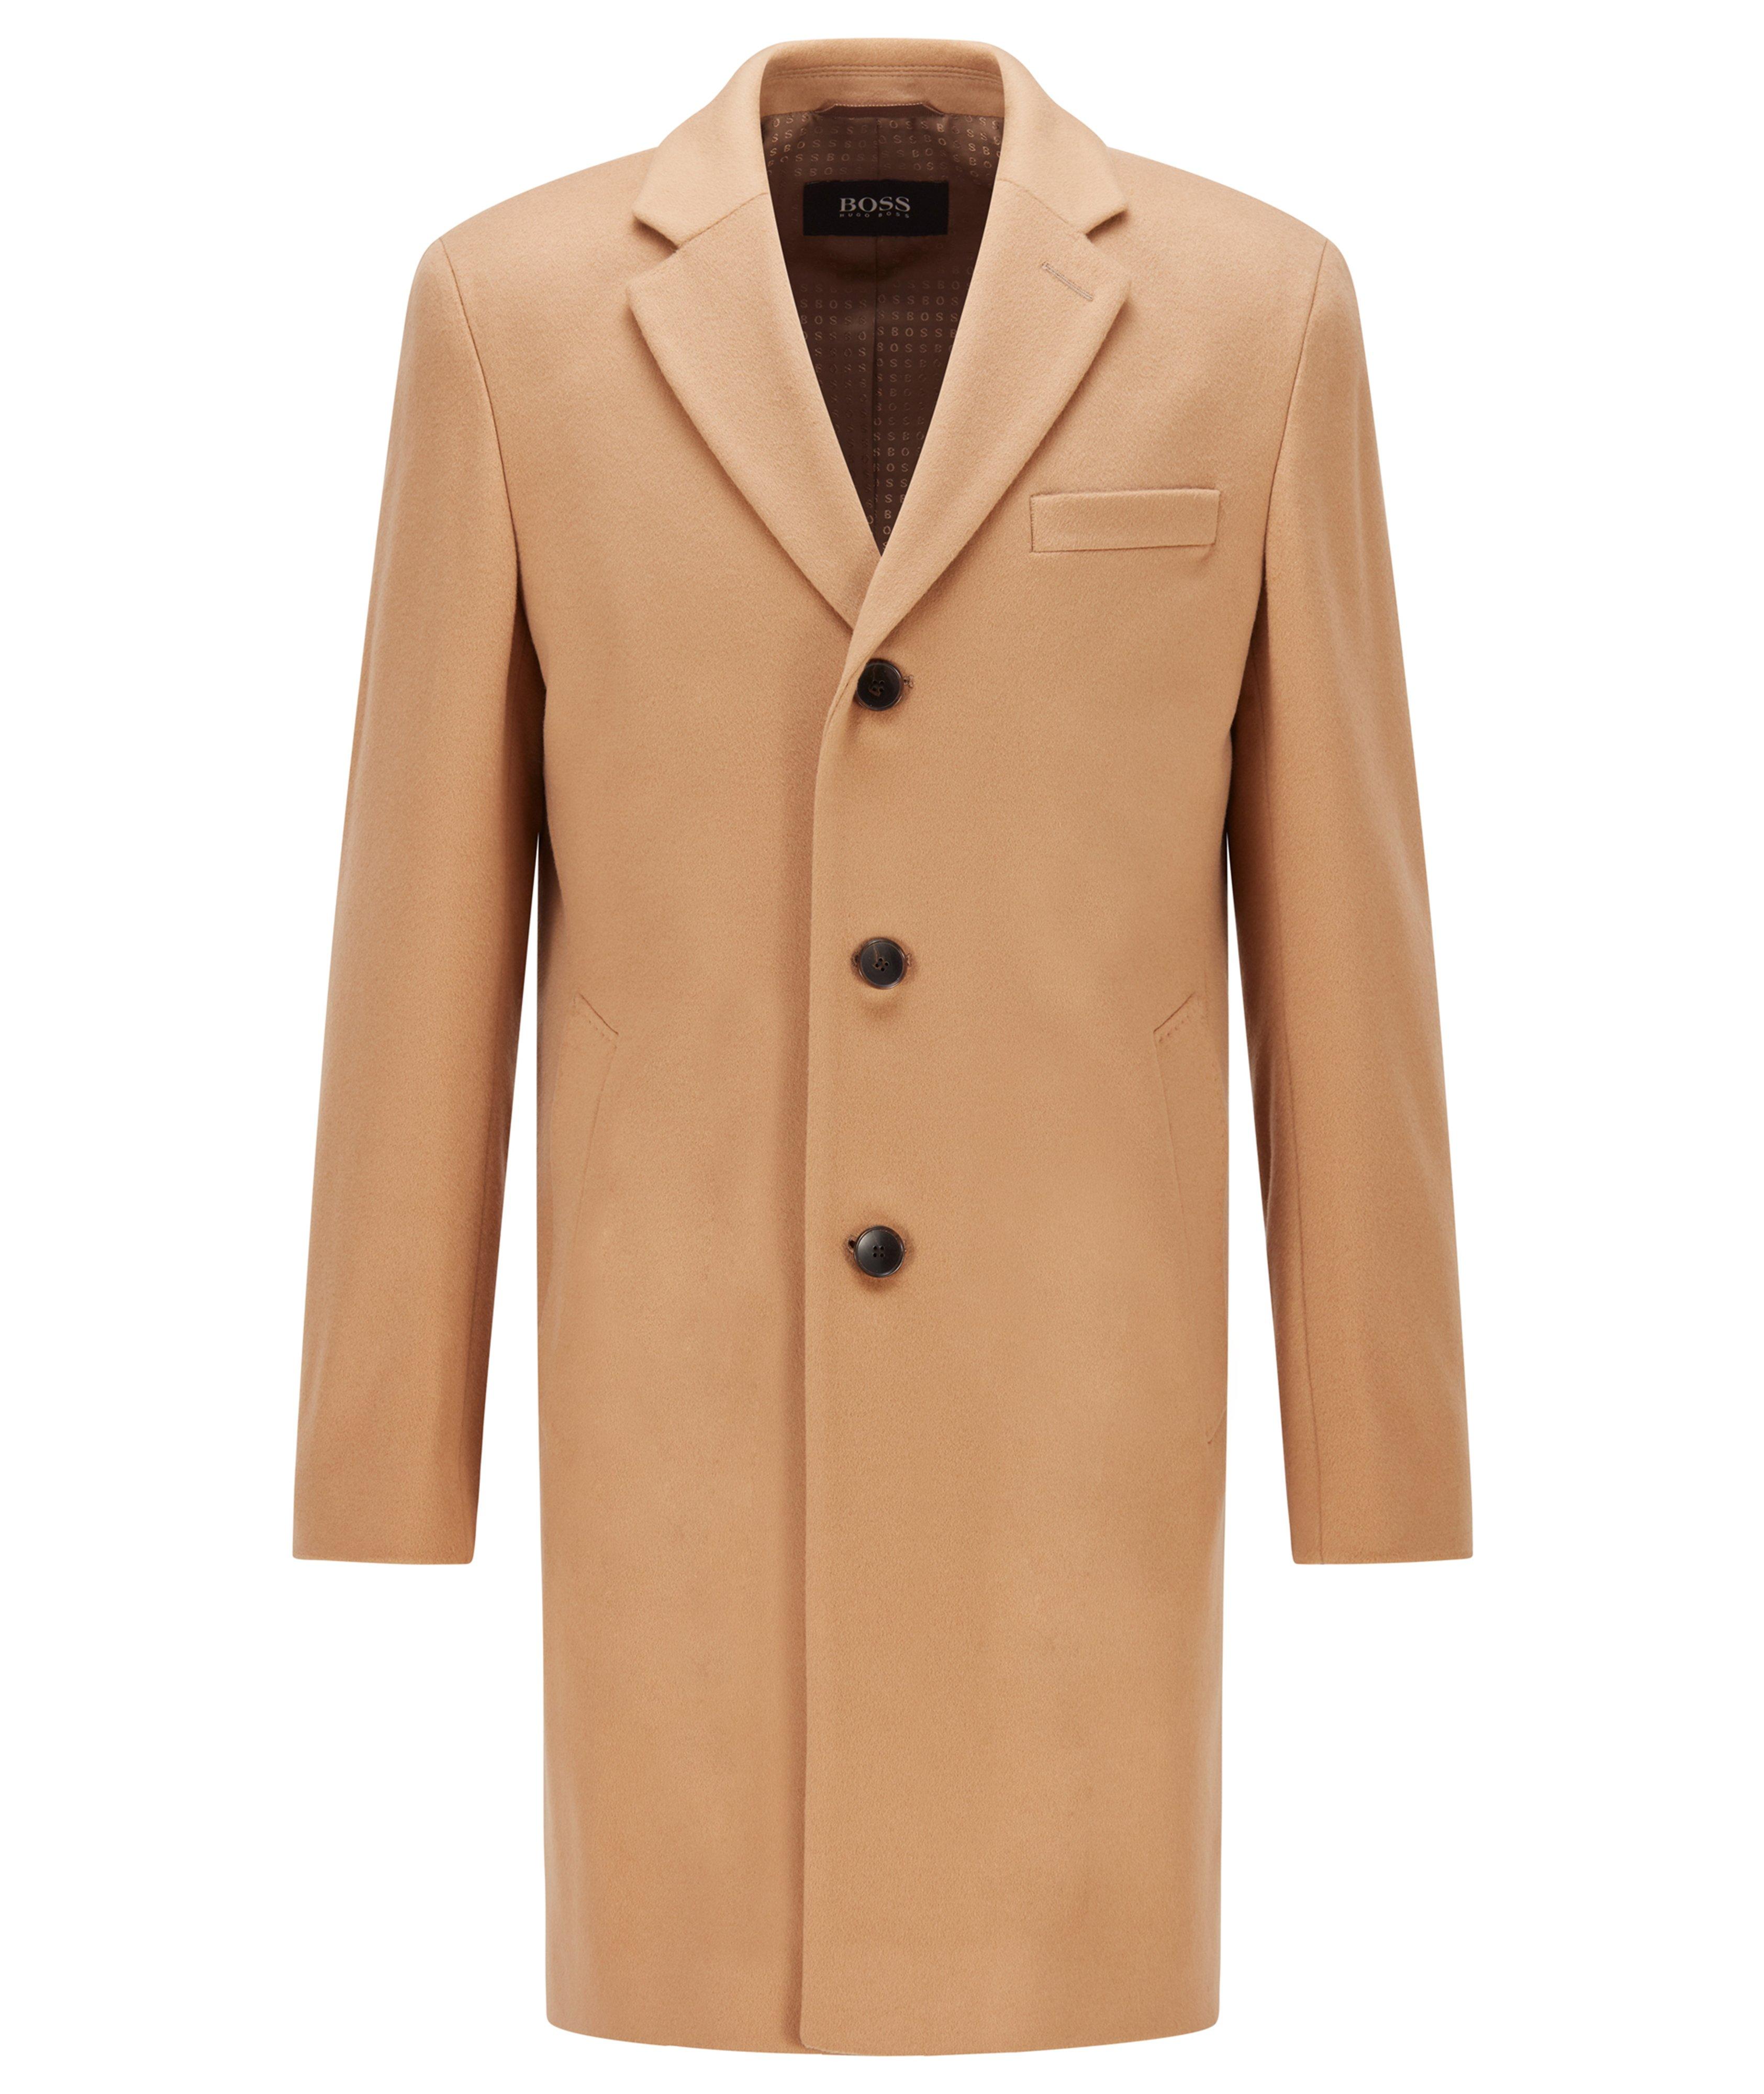 Hyde Wool-Cashmere Topcoat image 0